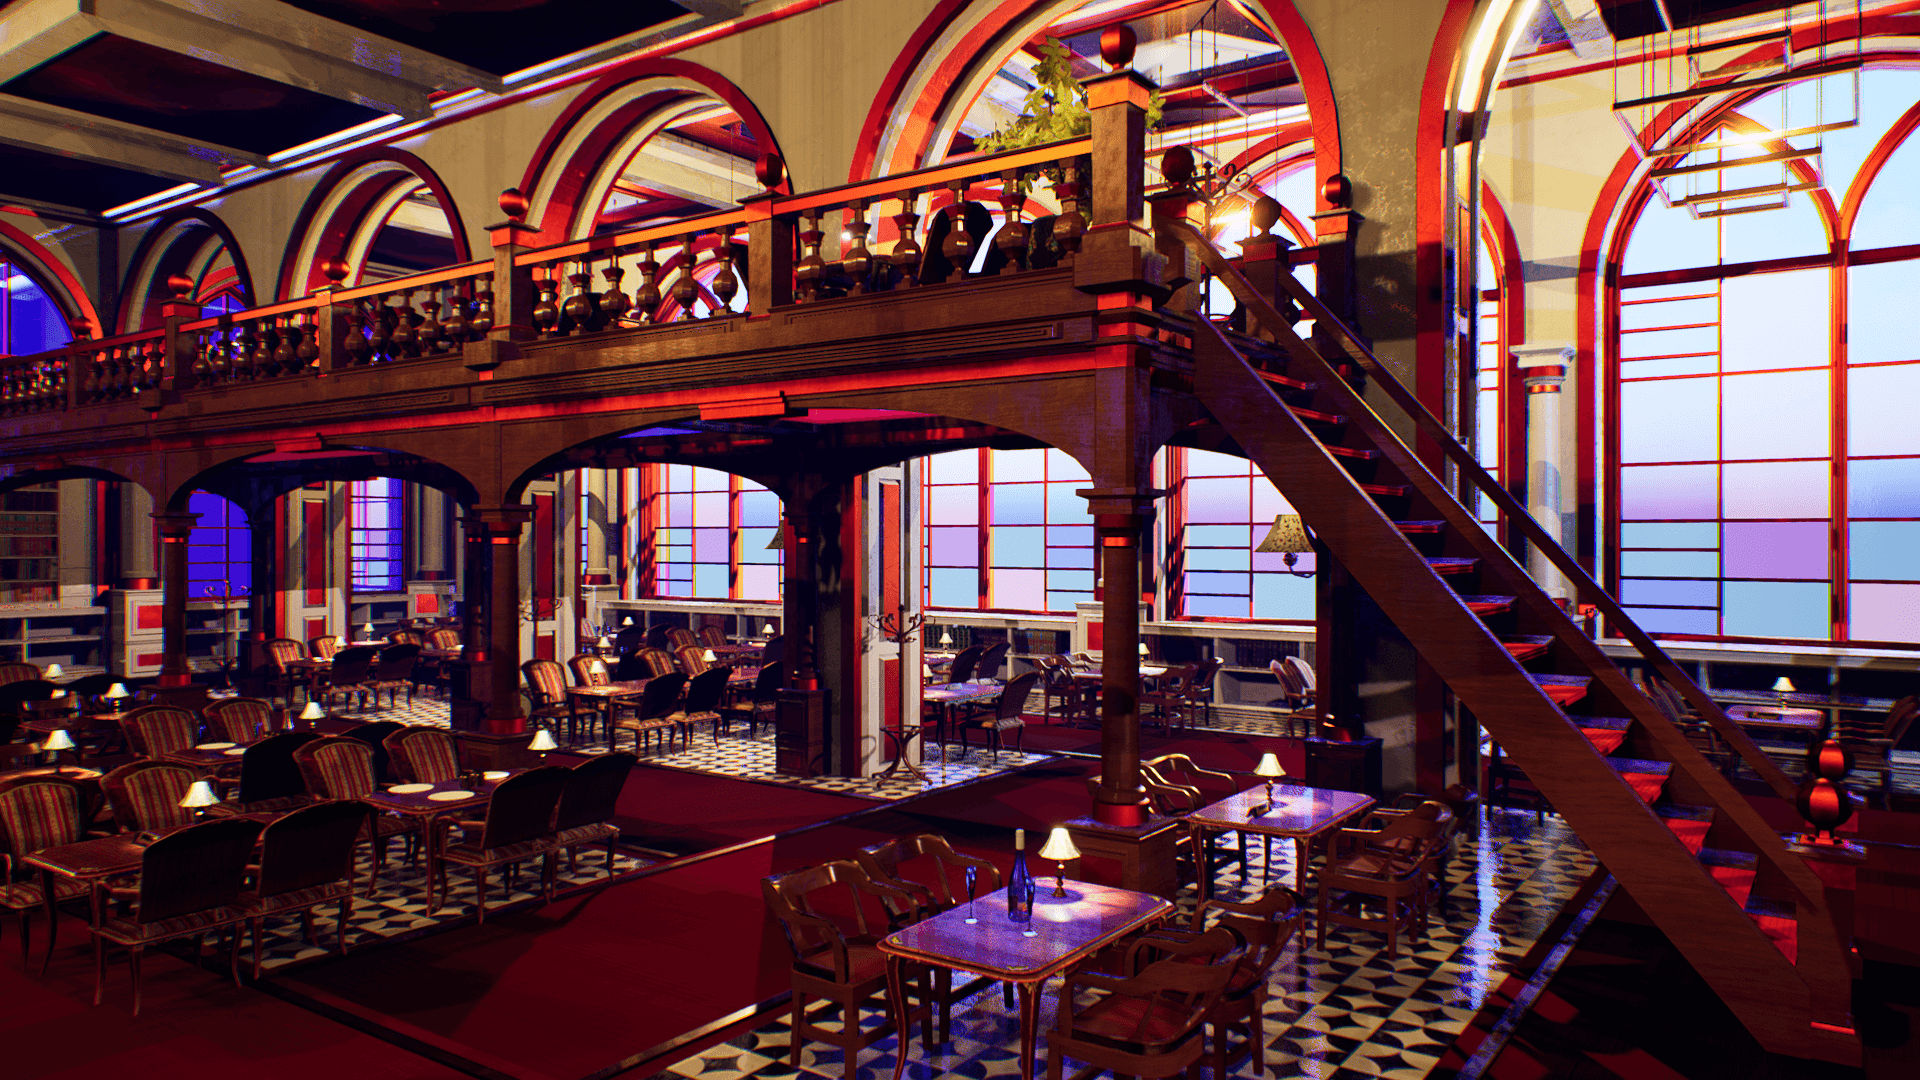 An image showing Restaurant Royale asset pack, created with Unreal Engine.